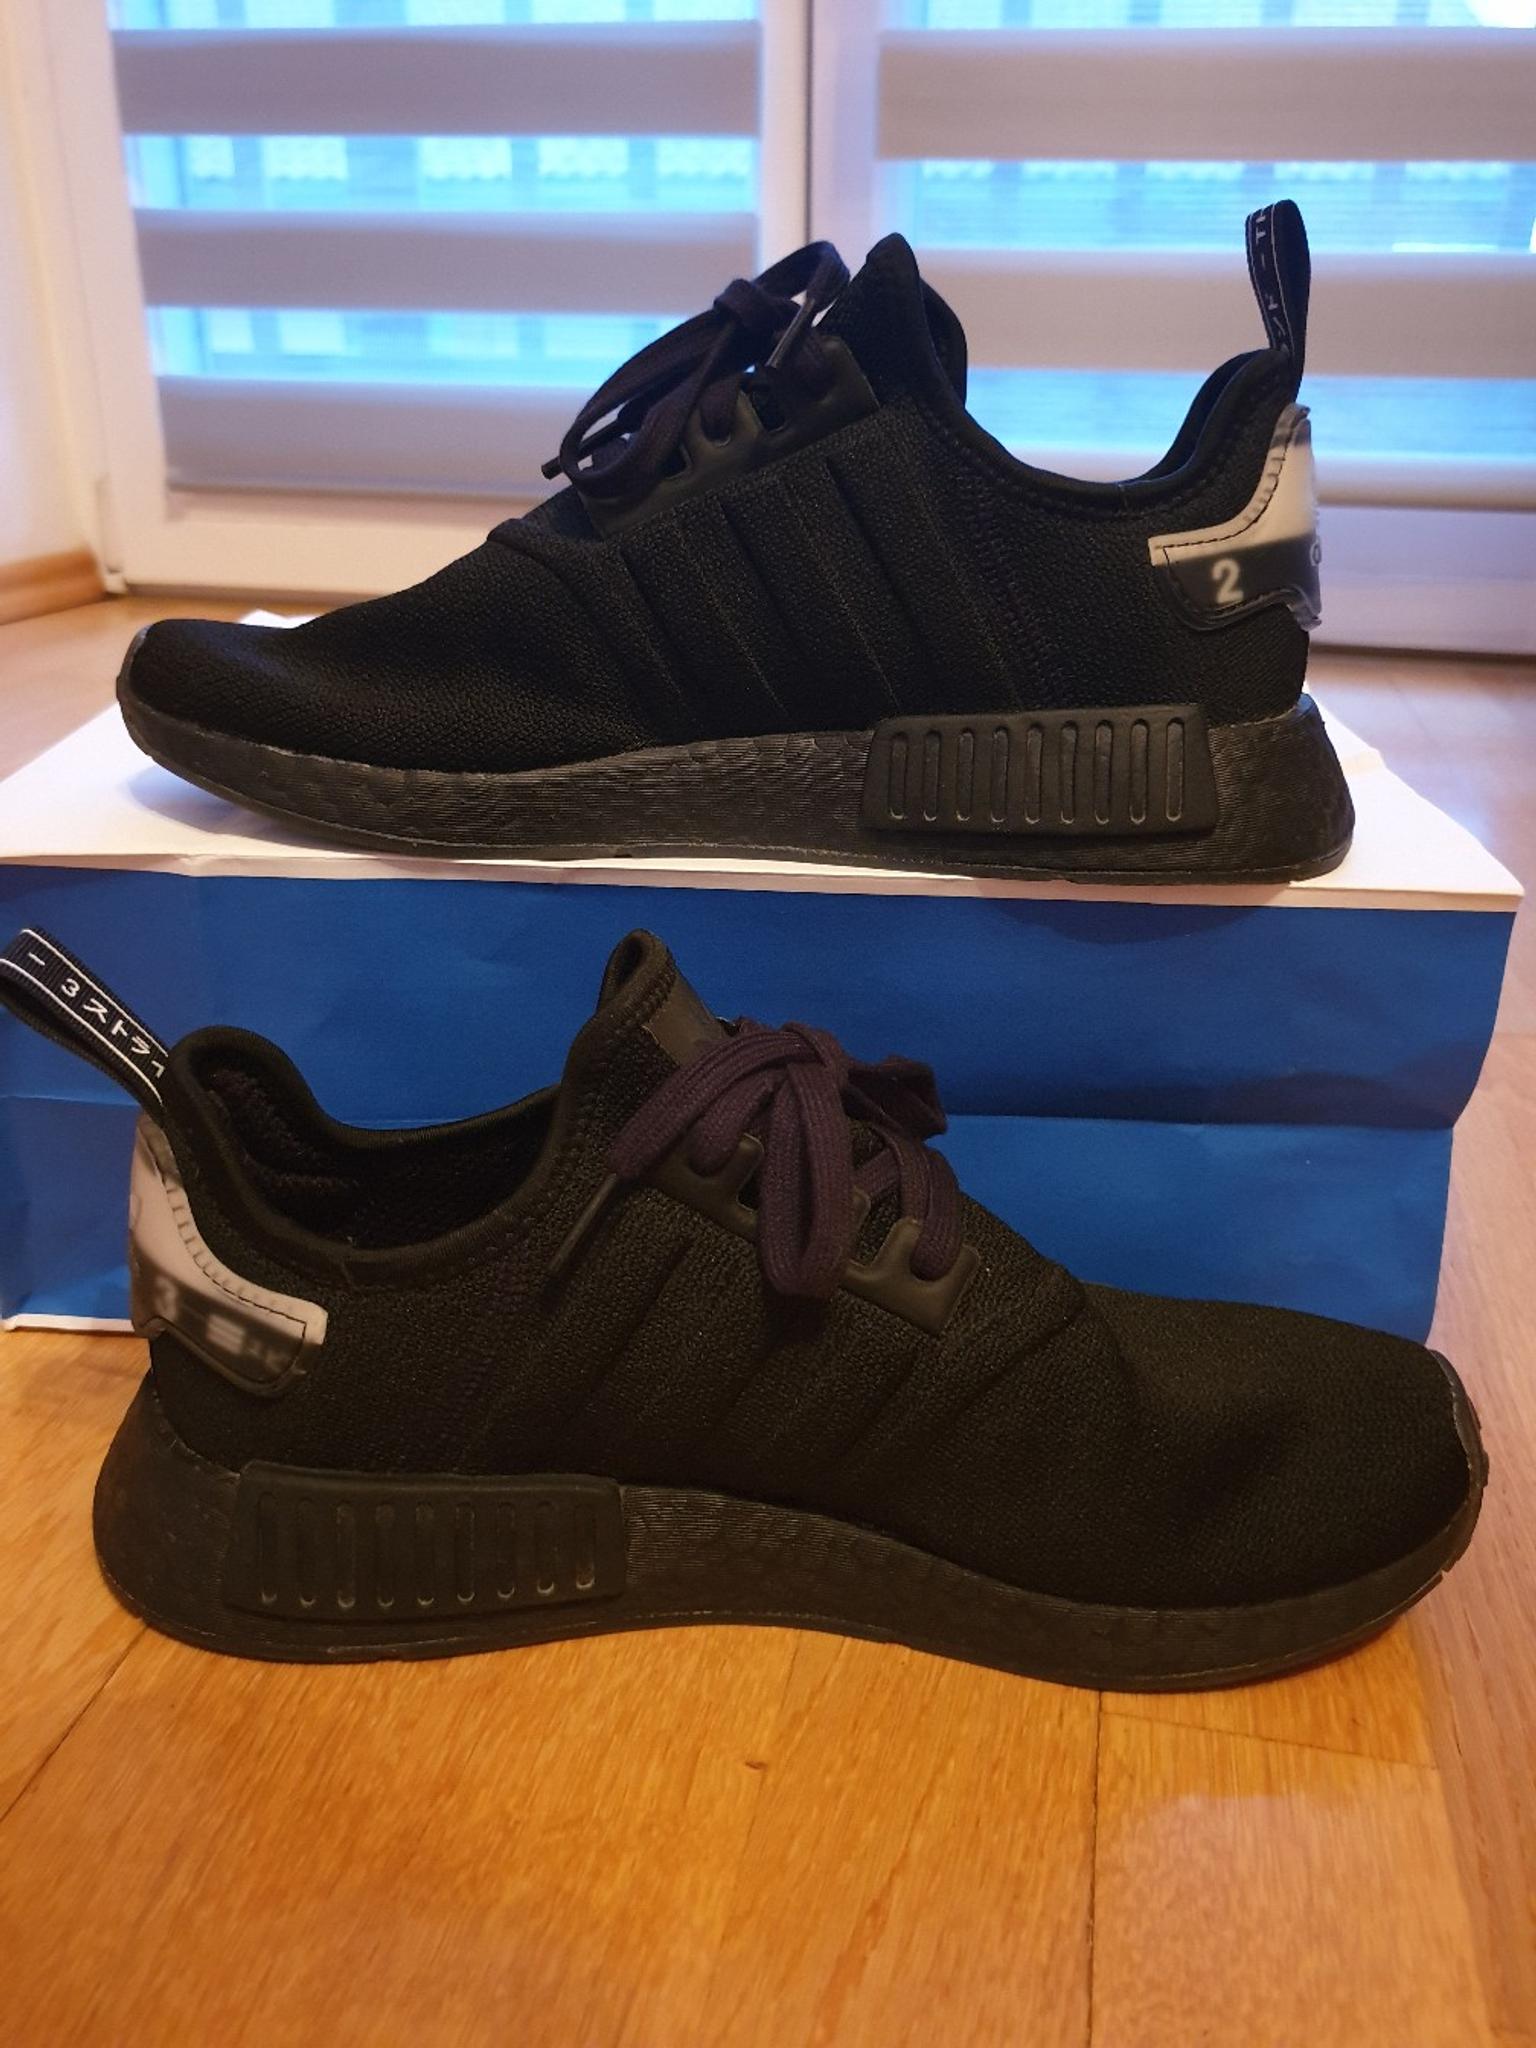 nmd molded stripes